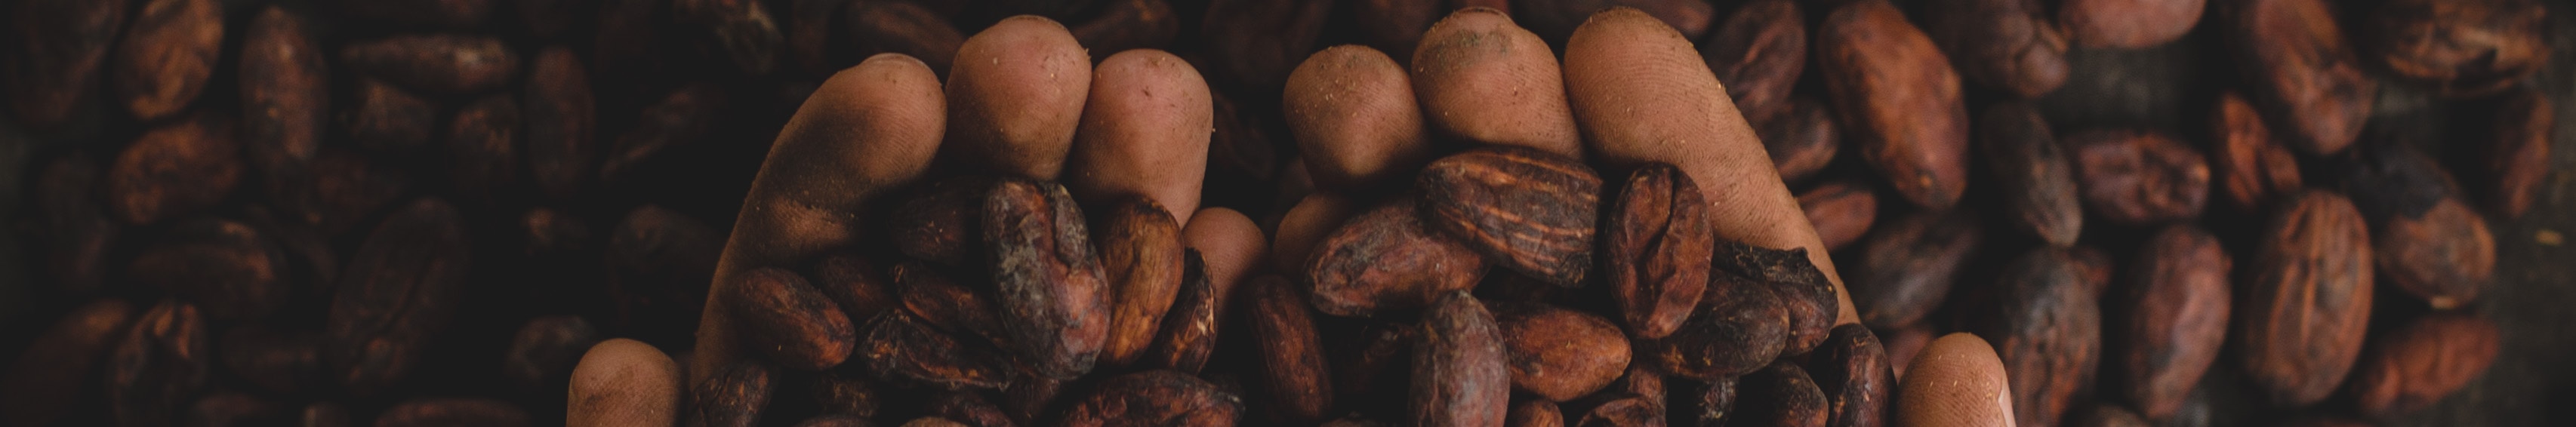 Barry Callebaut supported 214,124 cocoa farmers from its supply chain in 2021-2022